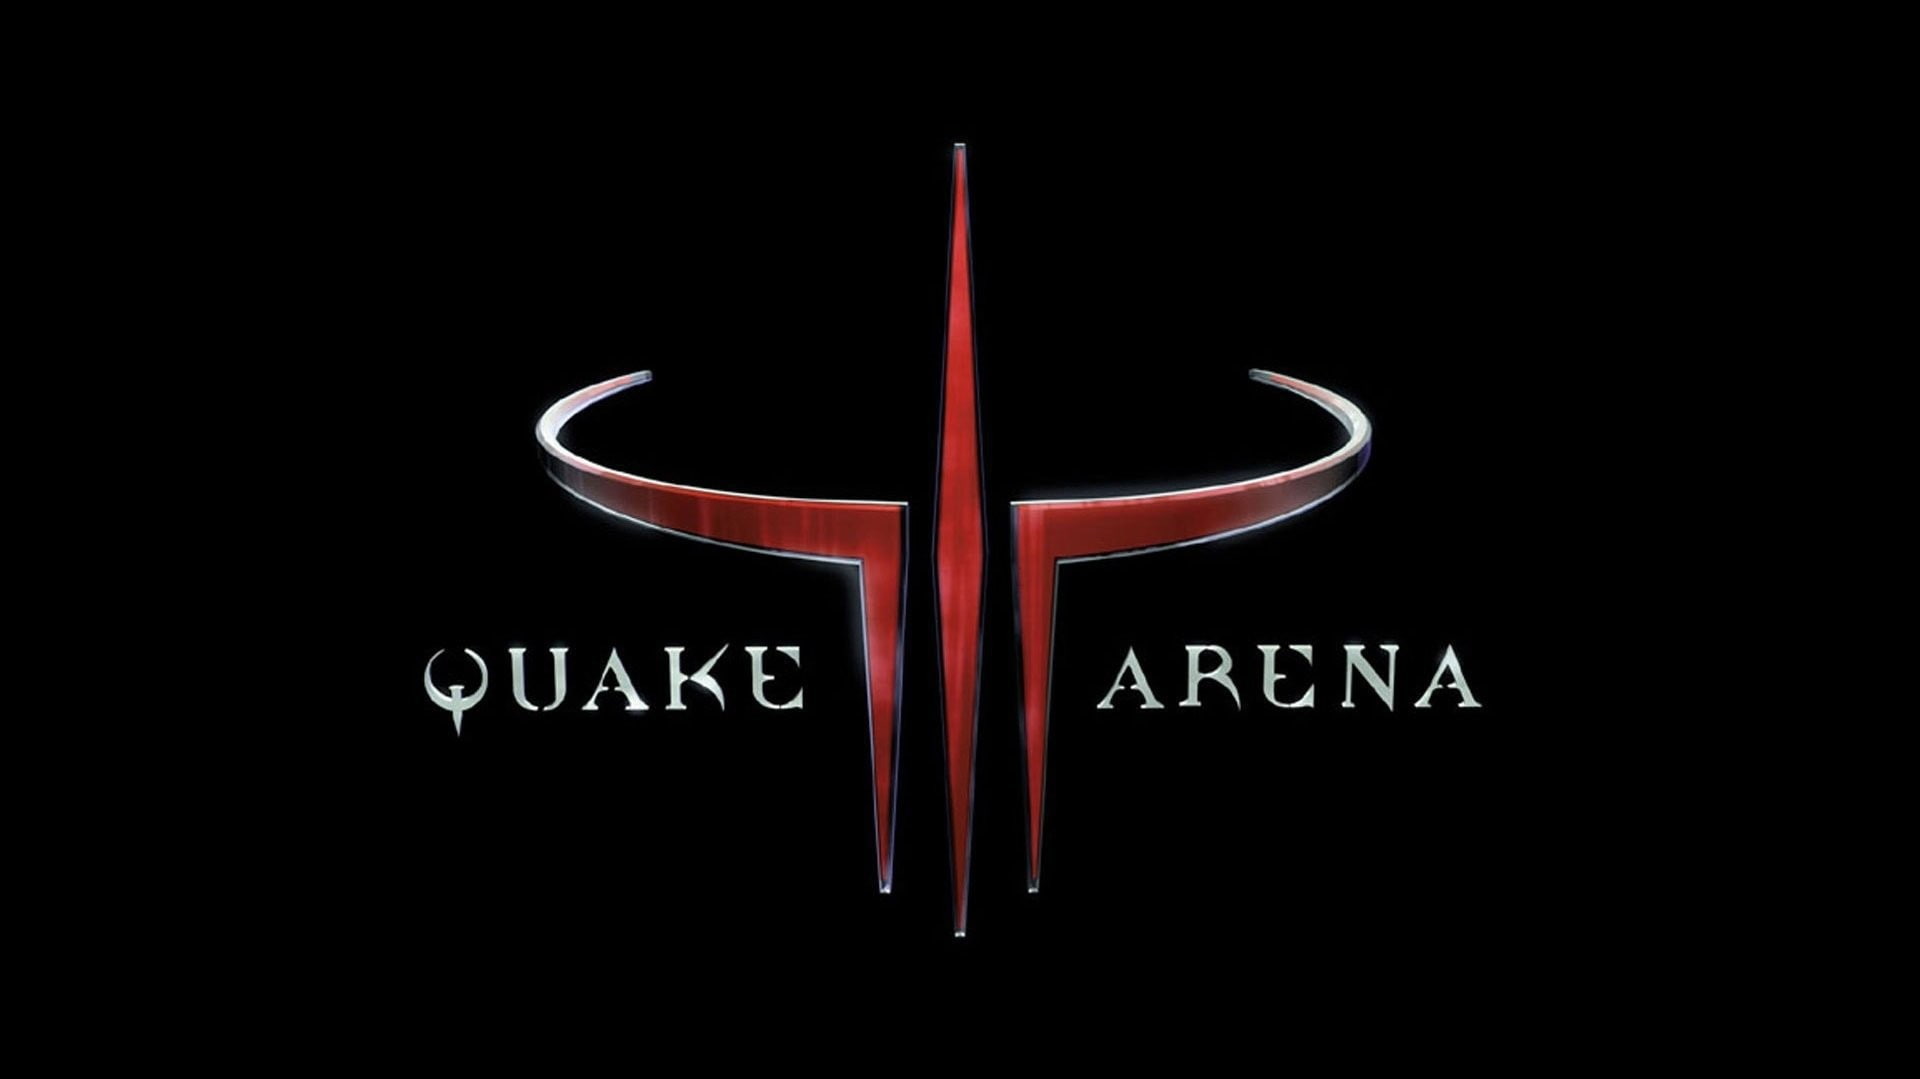 Quake, video games, first-person shooter, black, red